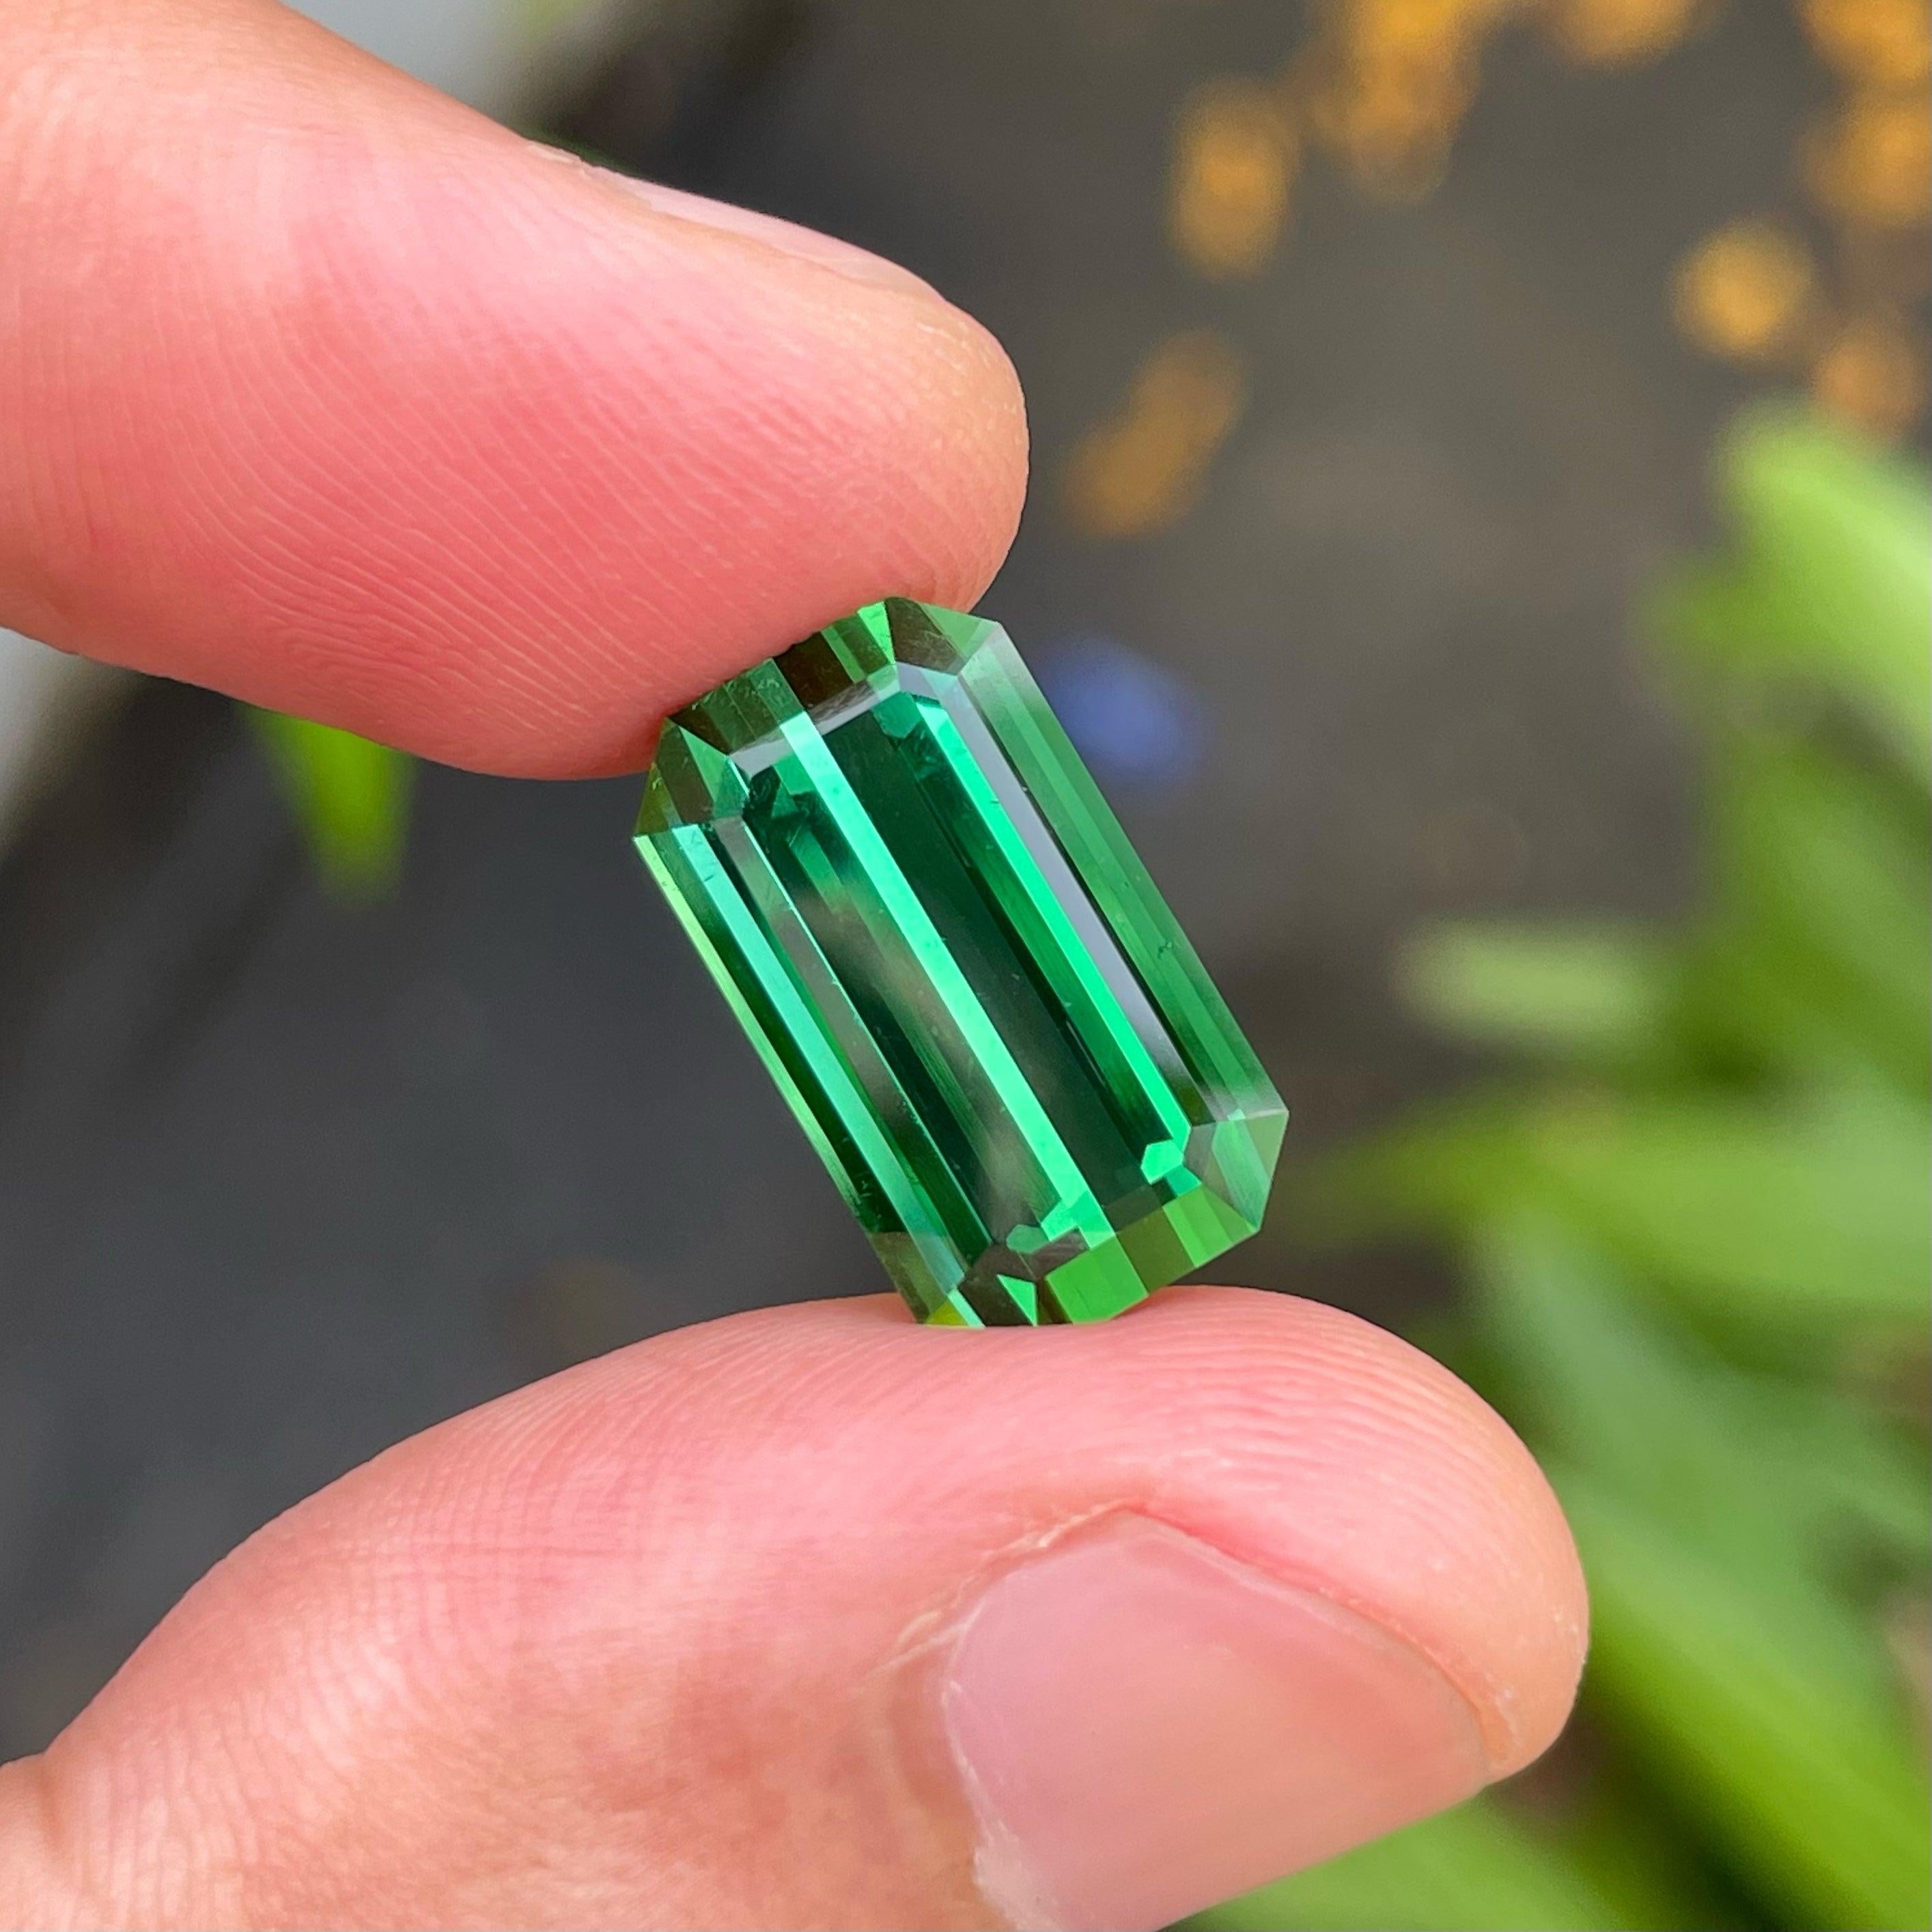 Bright Green Afghanistan Tourmaline Gemstone, available for sale at wholesale price natural high quality 8.90 Carats Octagon Shape From Afghanistan.

Product Information:
GEMSTONE TYPE:	Bright Green Afghanistan Tourmaline Gemstone
WEIGHT:	8.90